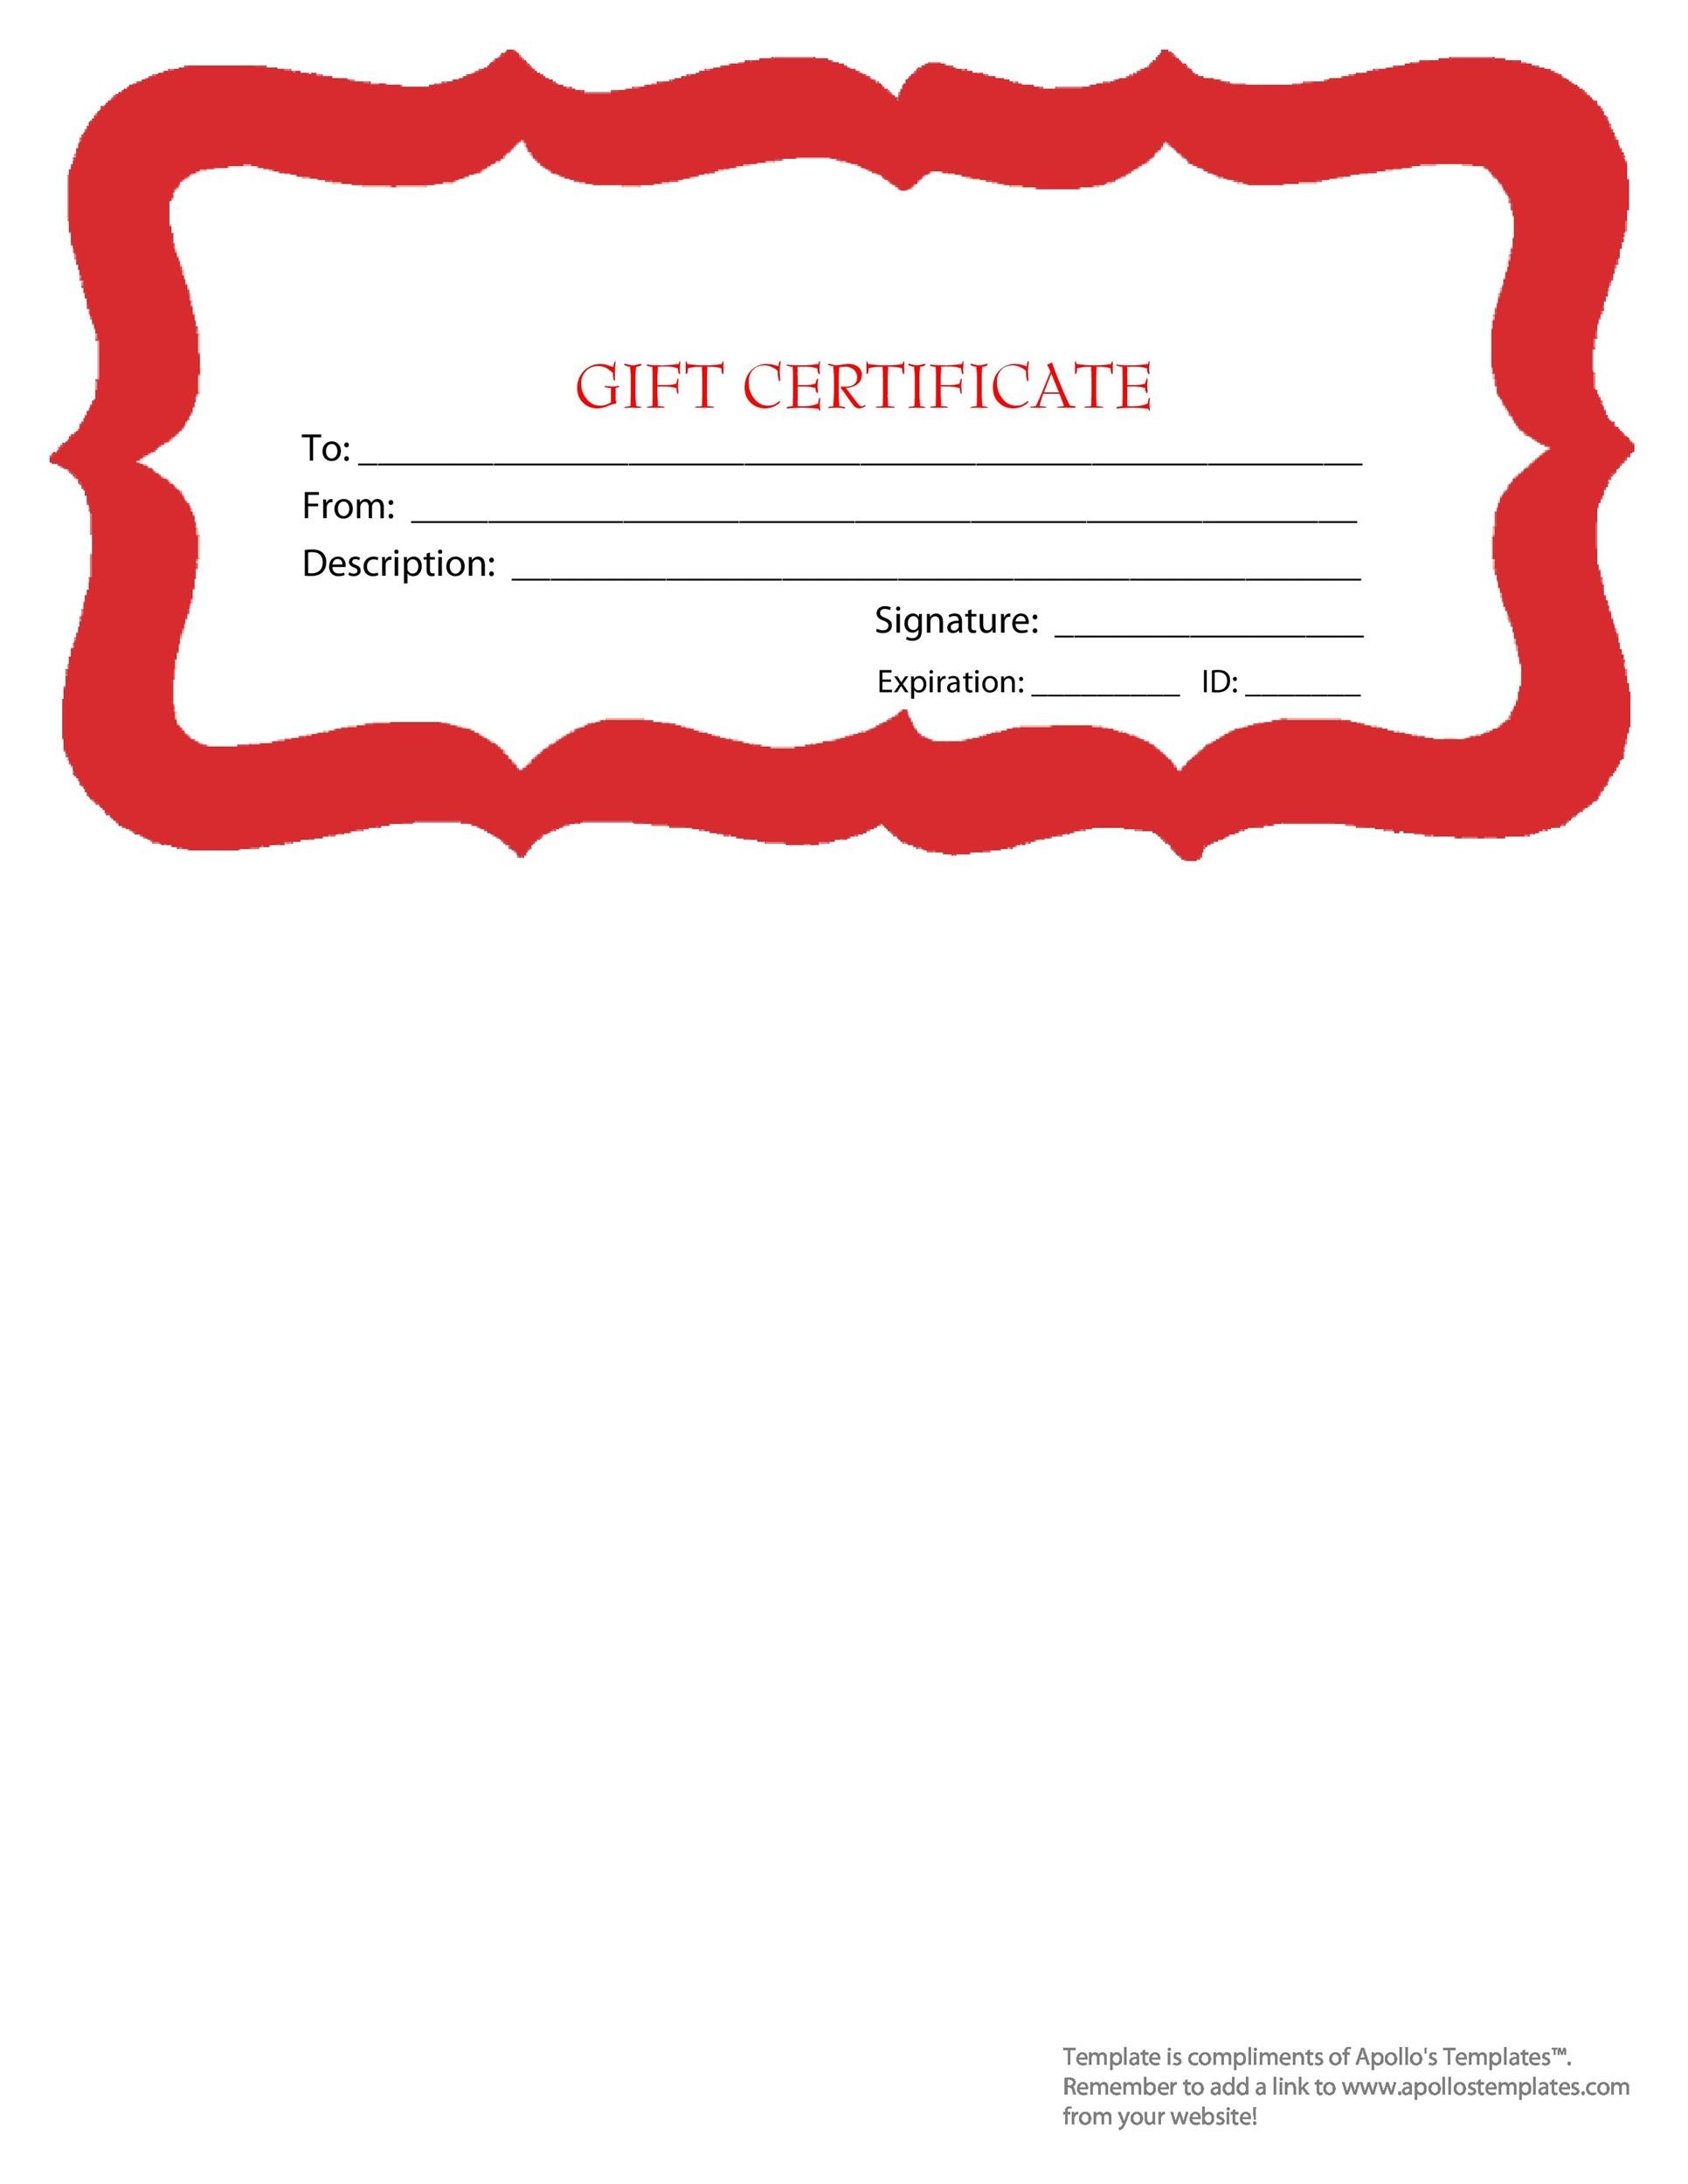 Free Gift Certificate Template 37 Printable